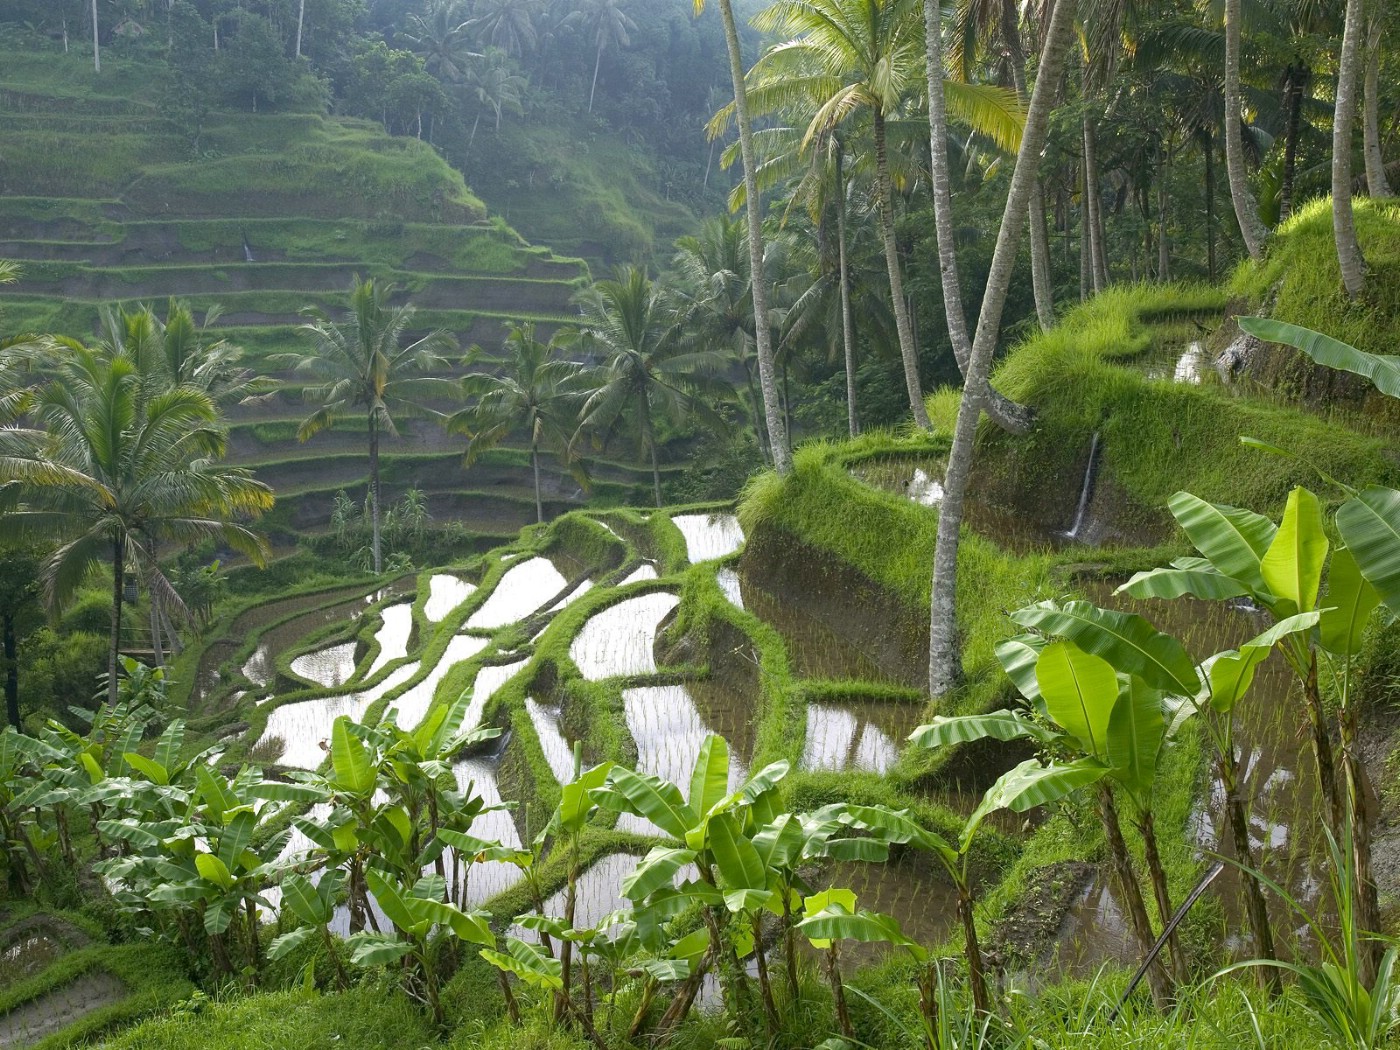 Indonesia’s agricultural downstream products have more export value